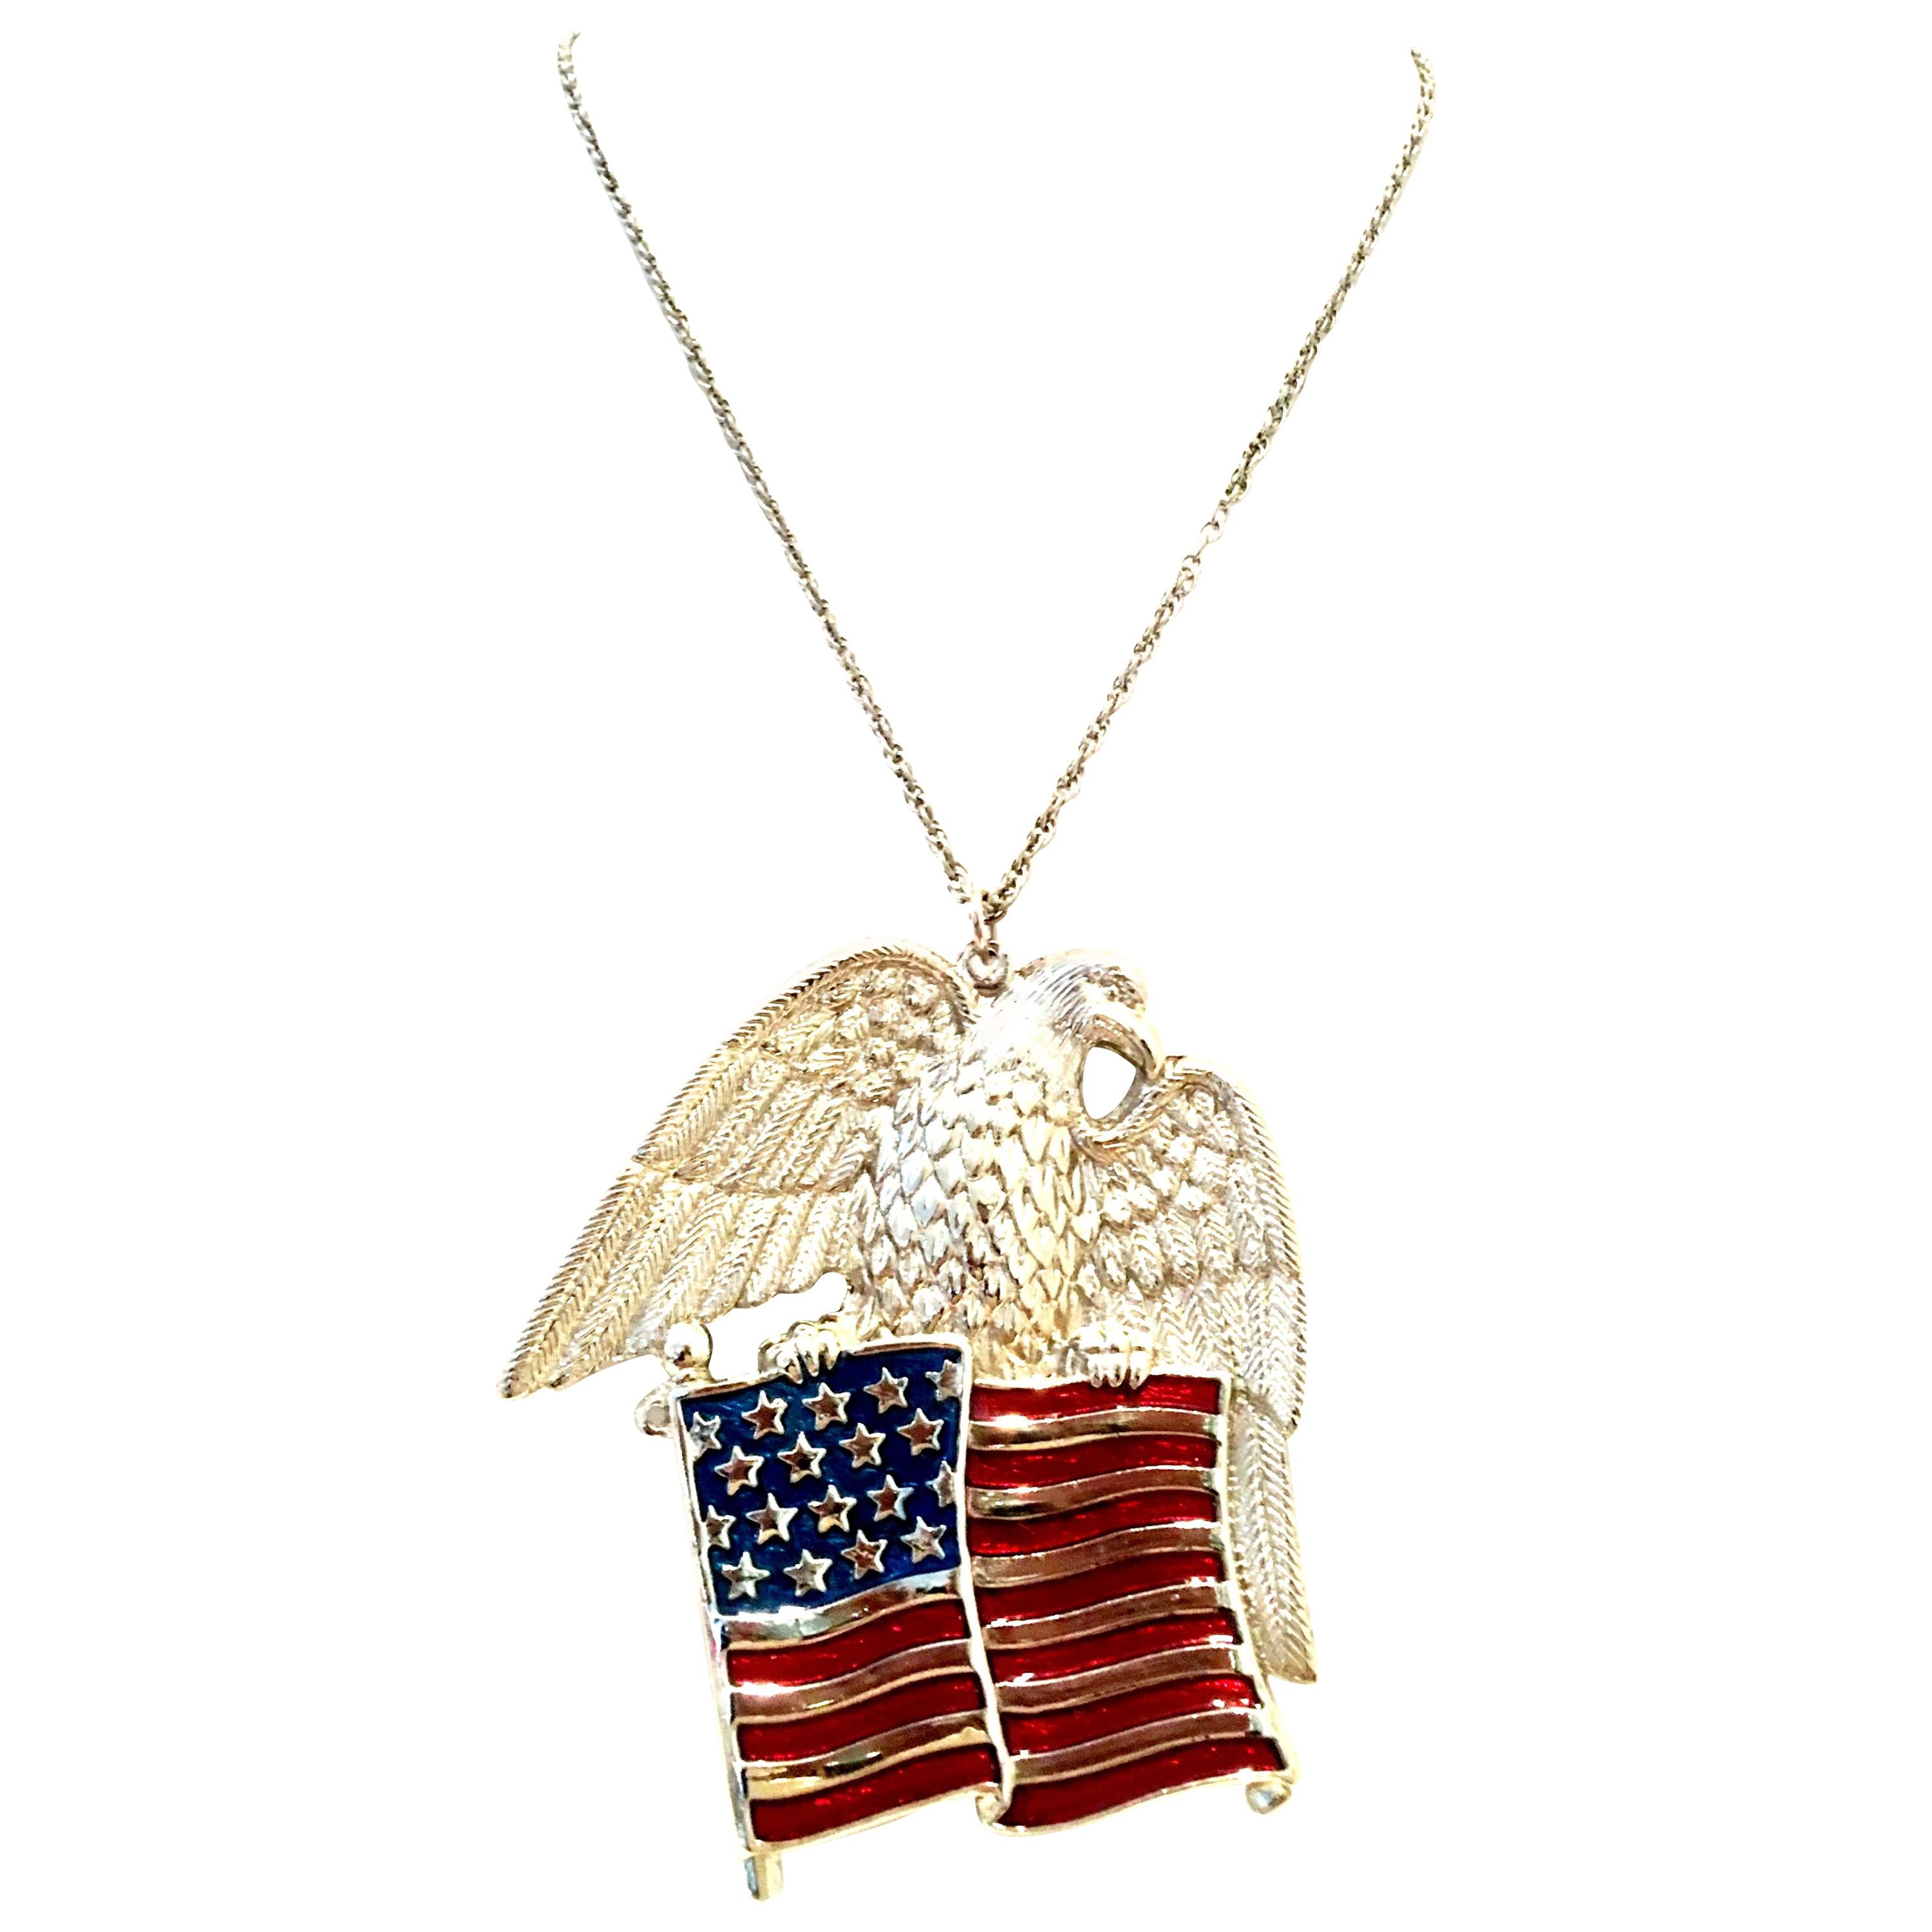 20th Century Silver Plate And Enamel Monumental Patriotic Eagle & American Flag Pendant Necklace By, Gorham. This fantastic dimensional, timeless and modern piece features a silver plate rhodium link necklace with a two sided substantial heavy